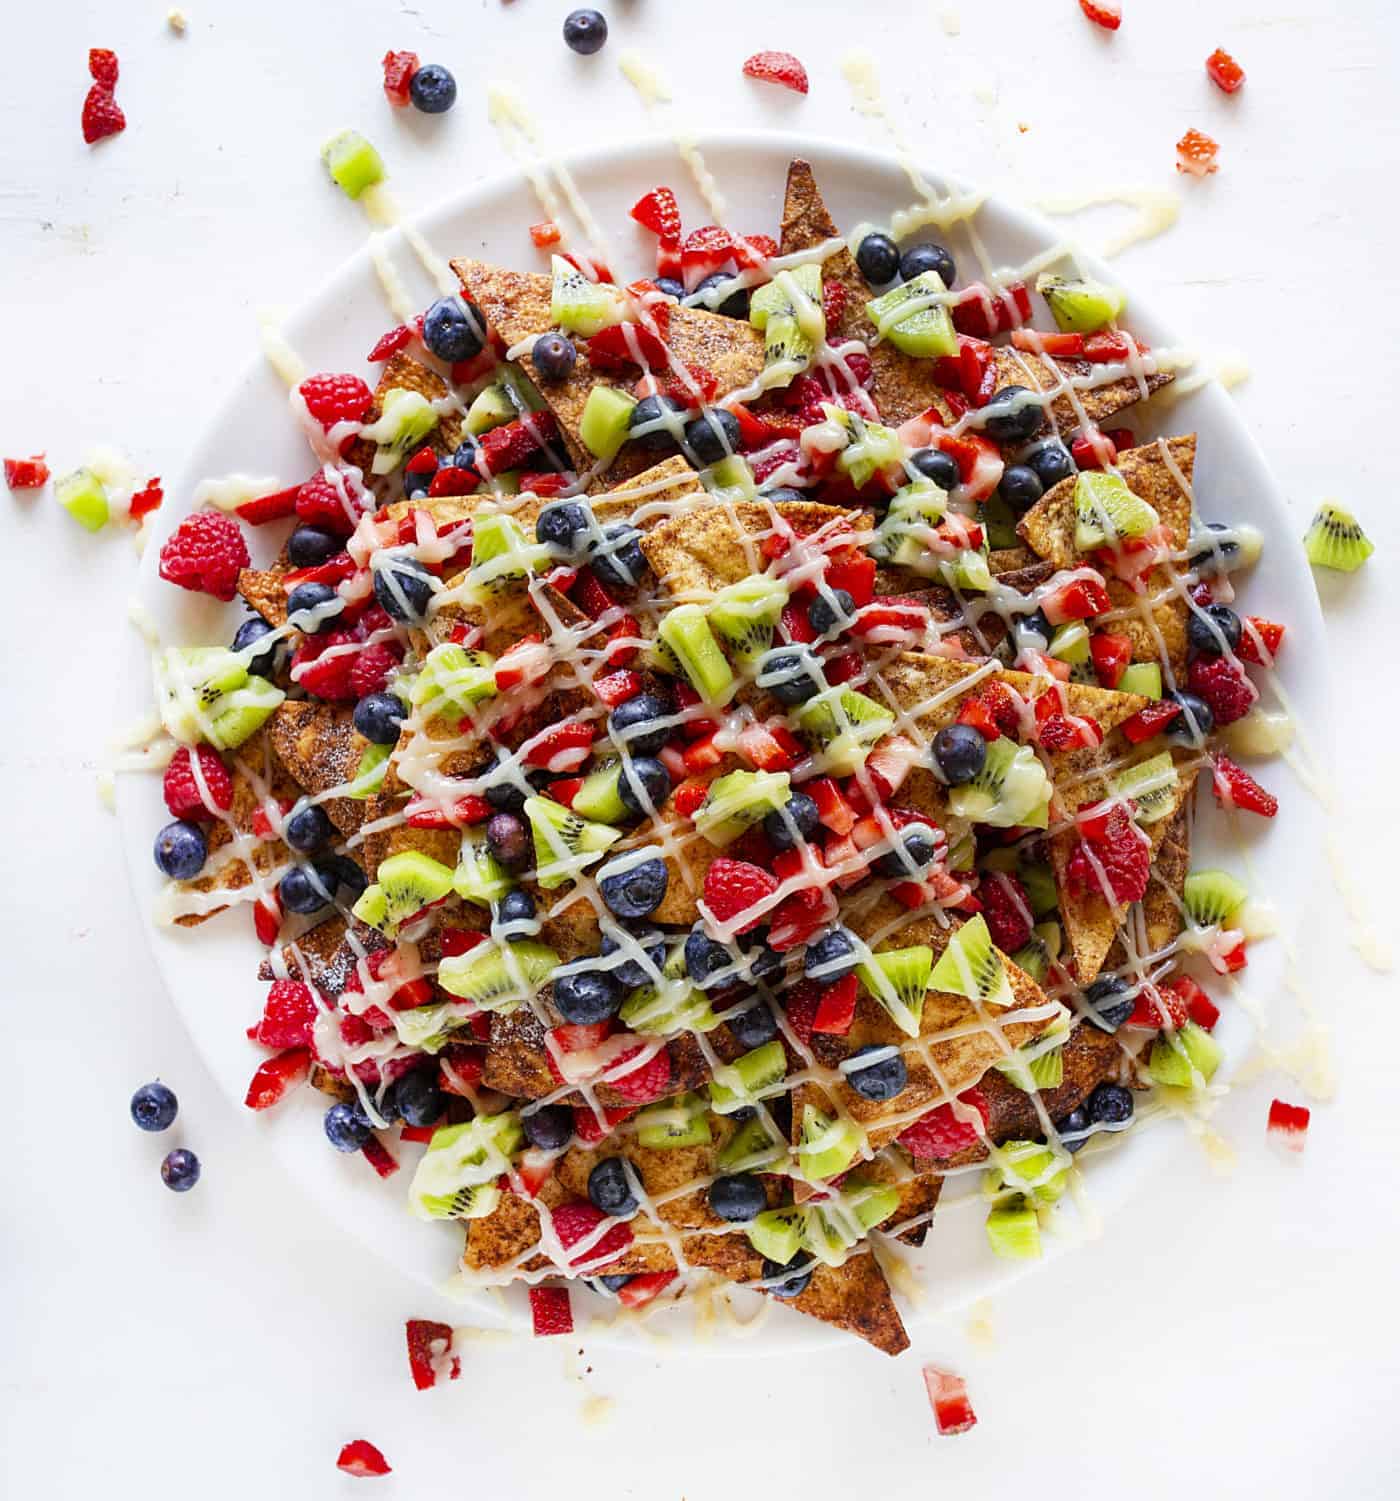 Looking for an easy but healthier snack for the kids? These stunning Dessert Nachos are a hit with even the pickiest of eaters!